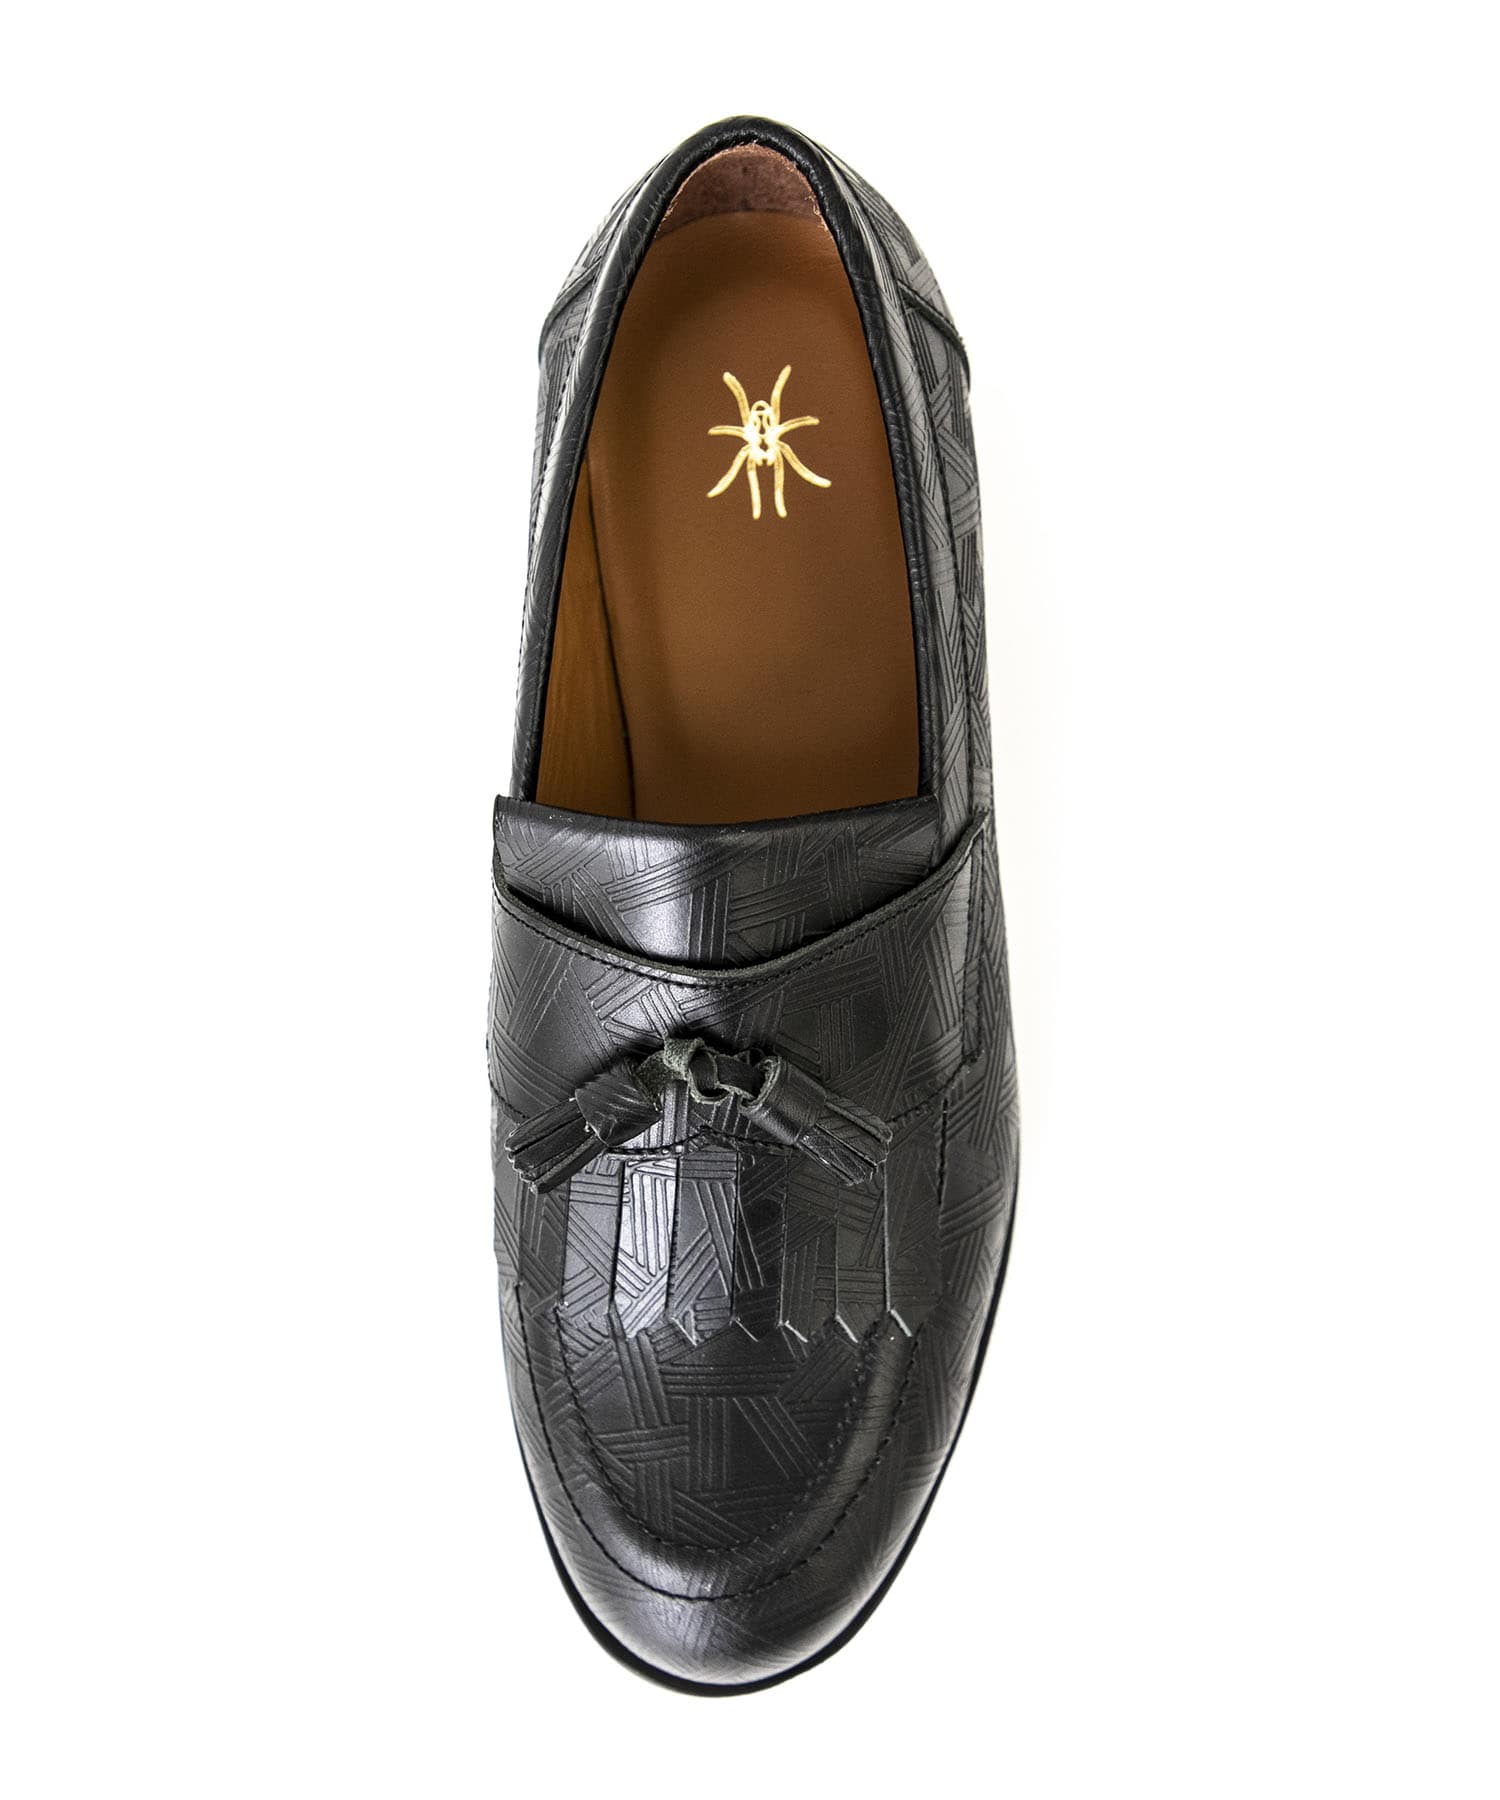 LAZY MANS TUSSEL LOAFER Tomo & Co.